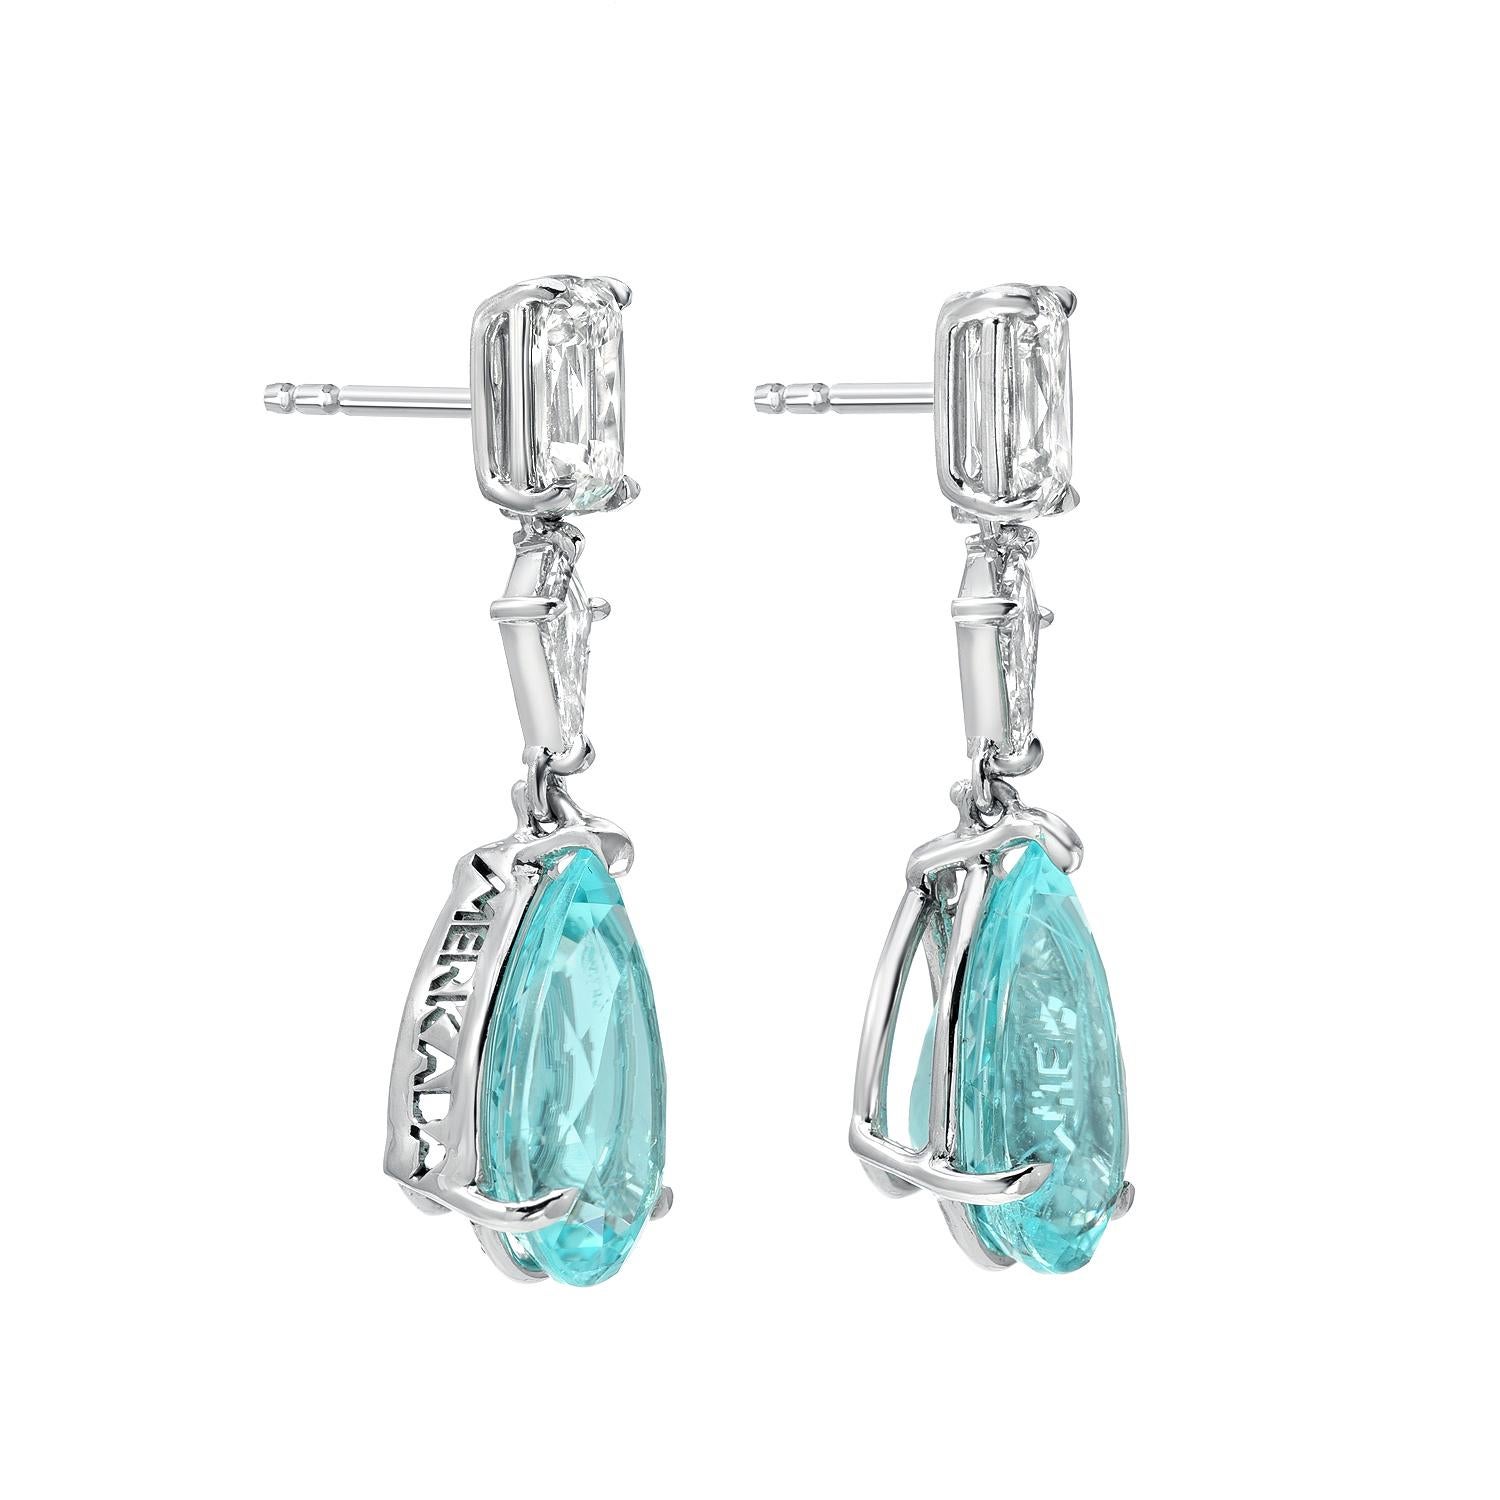 Ultra rare pair of GIA certified greenish blue Paraiba Tourmaline pear shapes, weighing a total of 6.25 carats, are set in these magnificent 1.53 carat diamond platinum earrings for women.
Paraiba Tourmalines of this color, cut and clarity are